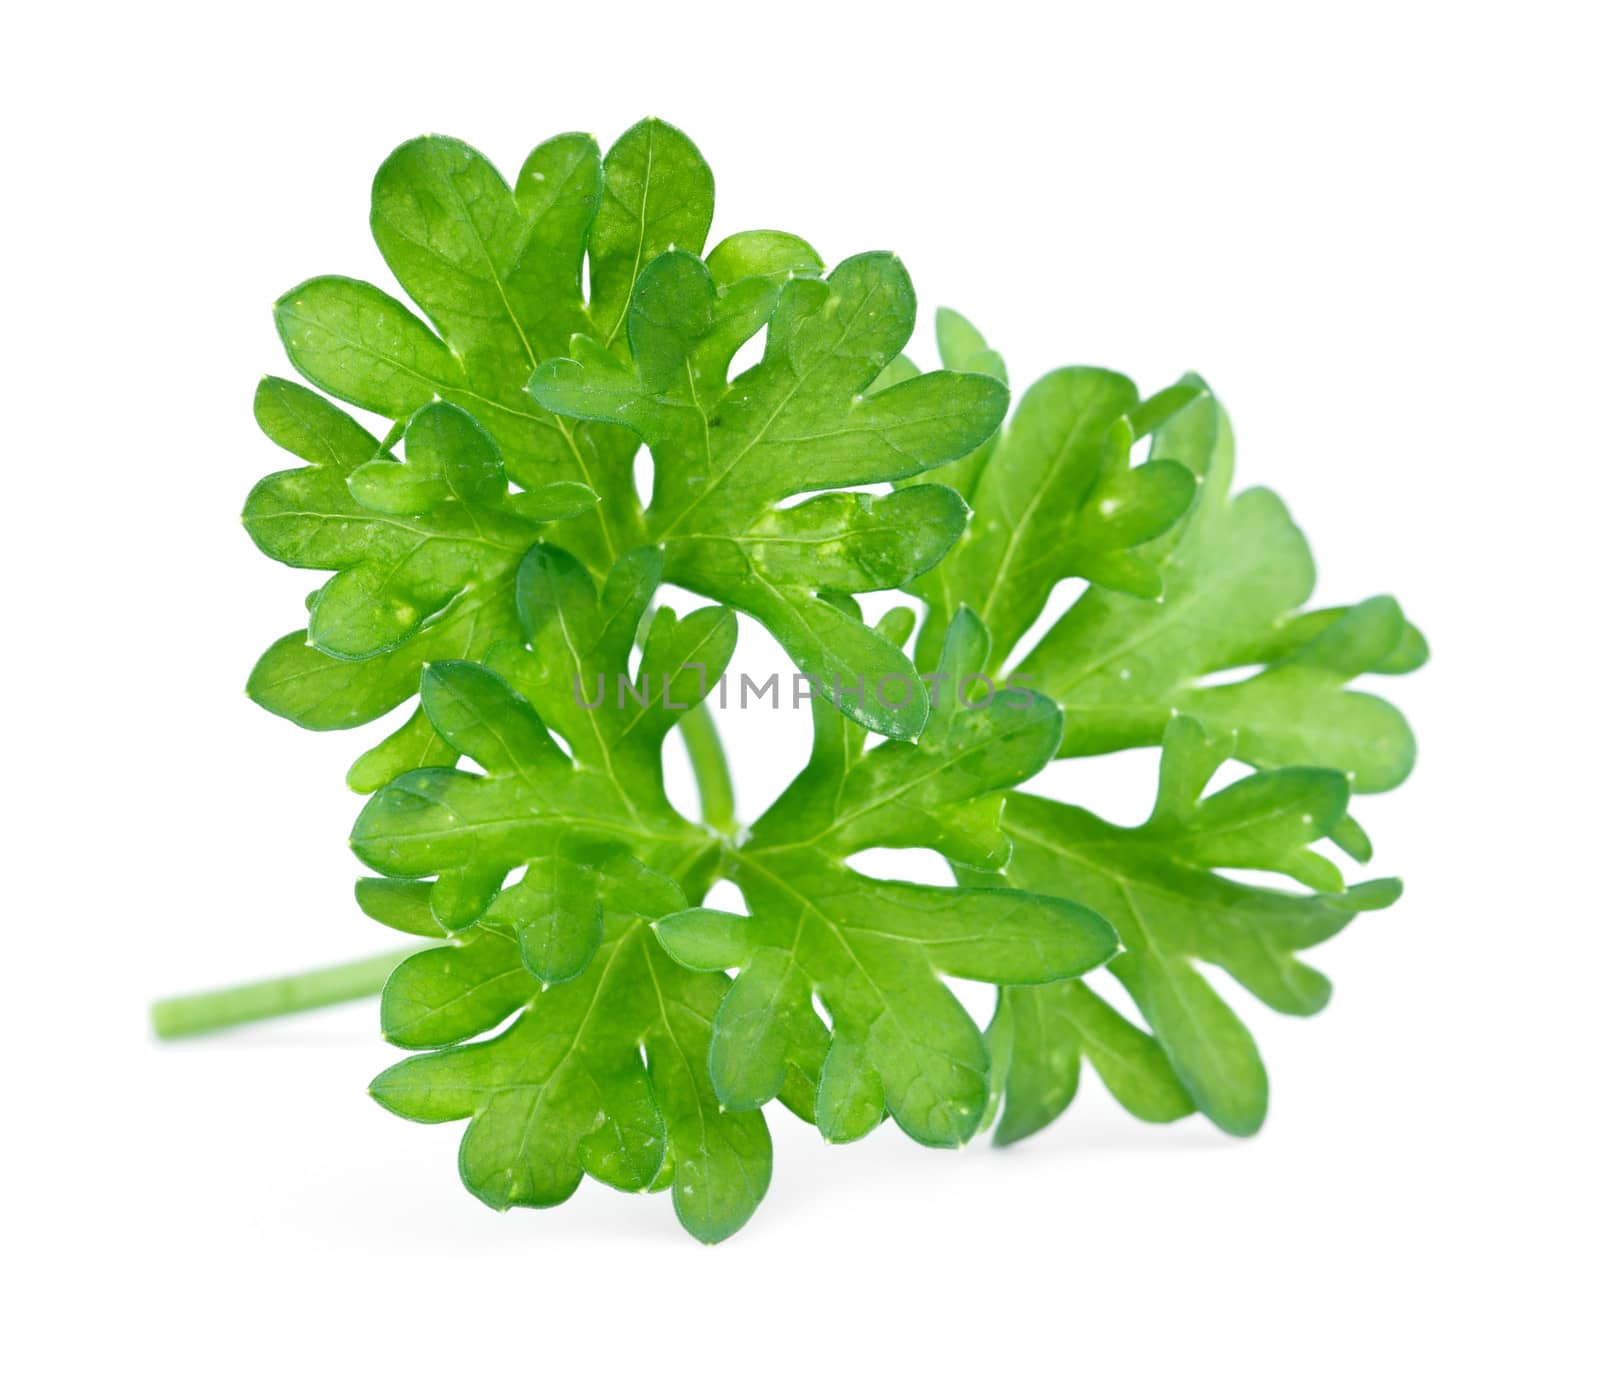 Green leaves of parsley isolated on white background by Bedolaga